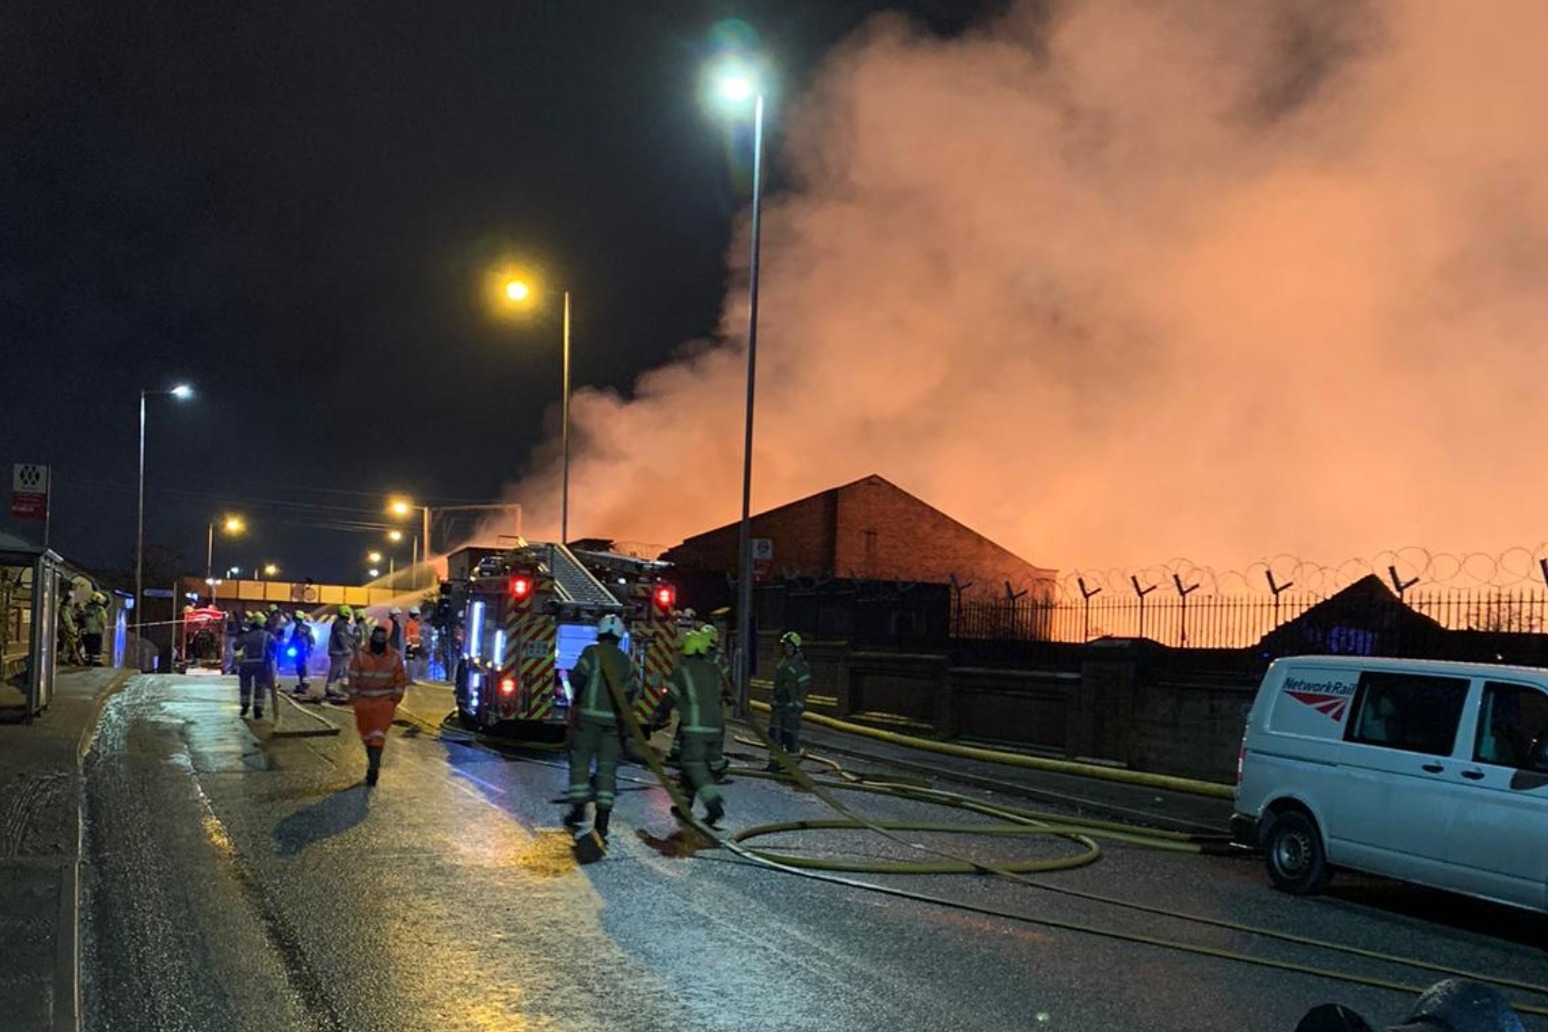 Major incident in Wolverhampton as fire engulfs factories and stops trains 